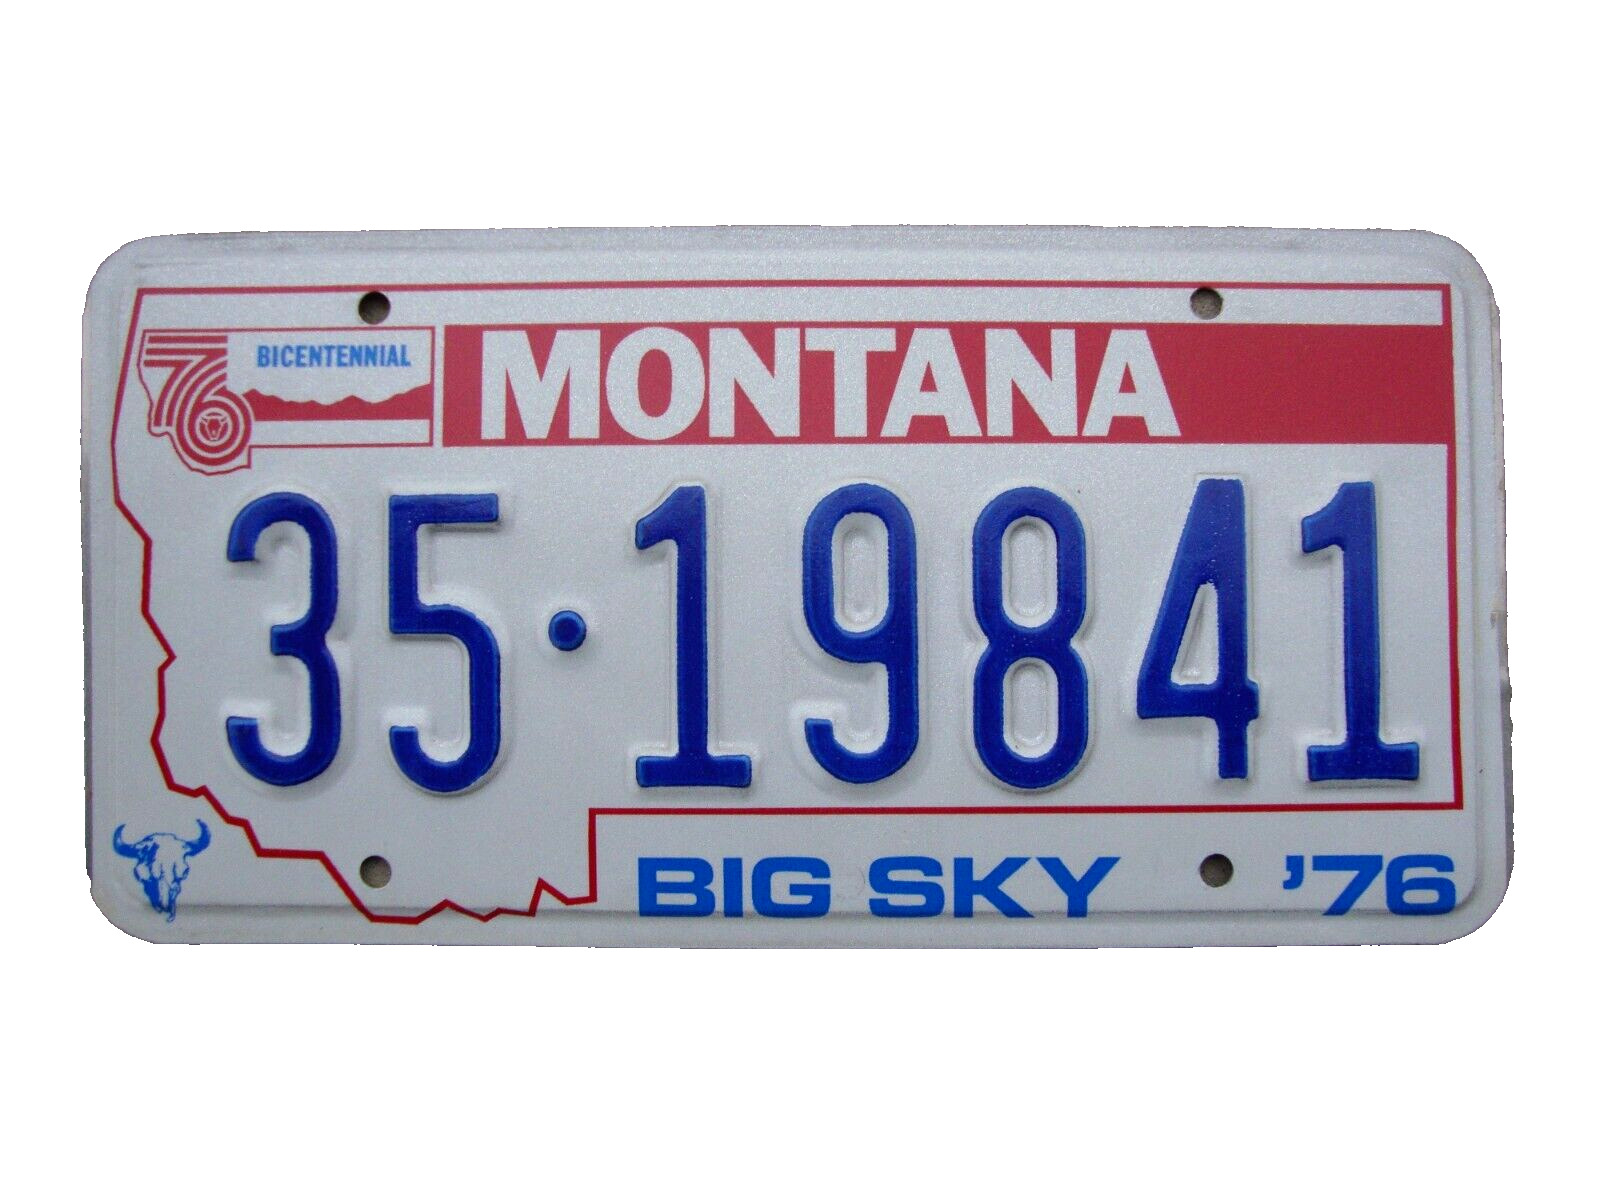 NOS 1976 Montana Bicentennial Big Sky license plate in unissued Mint condition